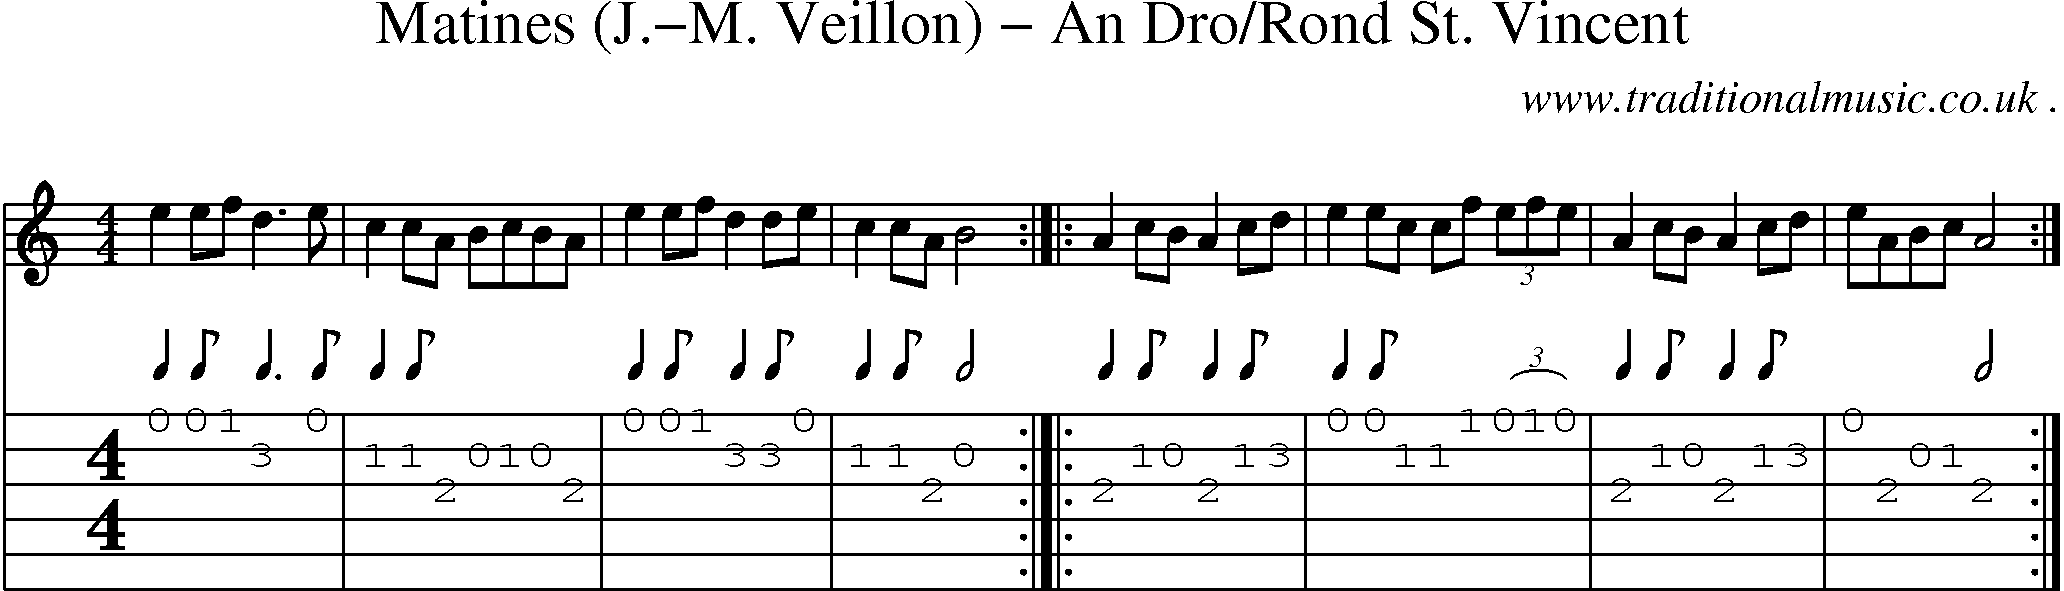 Sheet-Music and Guitar Tabs for Matines (j-m Veillon) An Drorond St Vincent